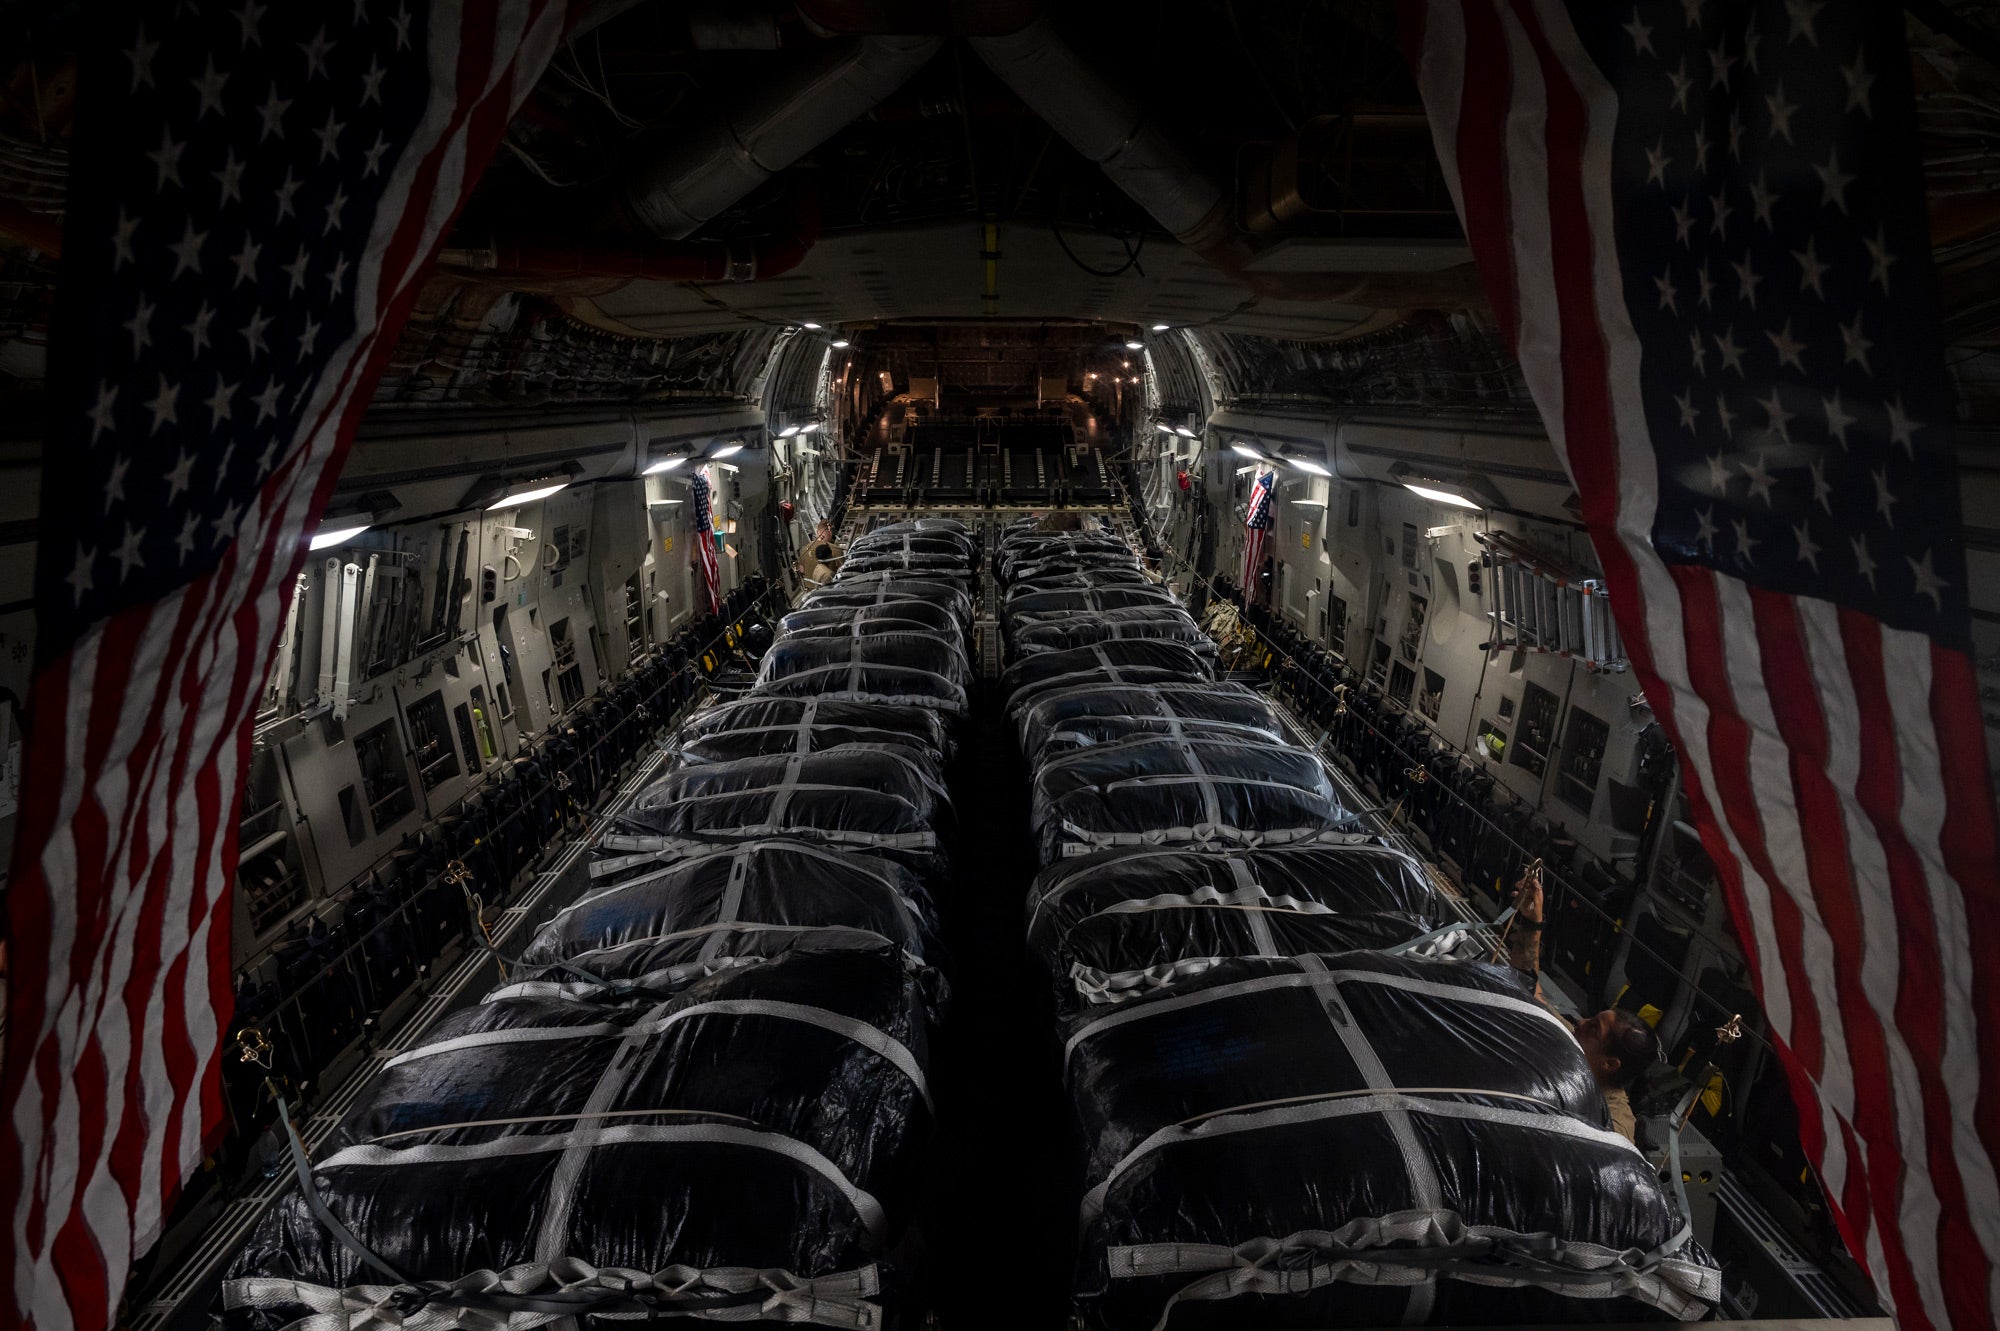 22 Low velocity parachutes loaded into this cargo plane. Each parachute can drop up to 2,200 pounds. That would be 48,400 pounds if these payloads are maxed out.